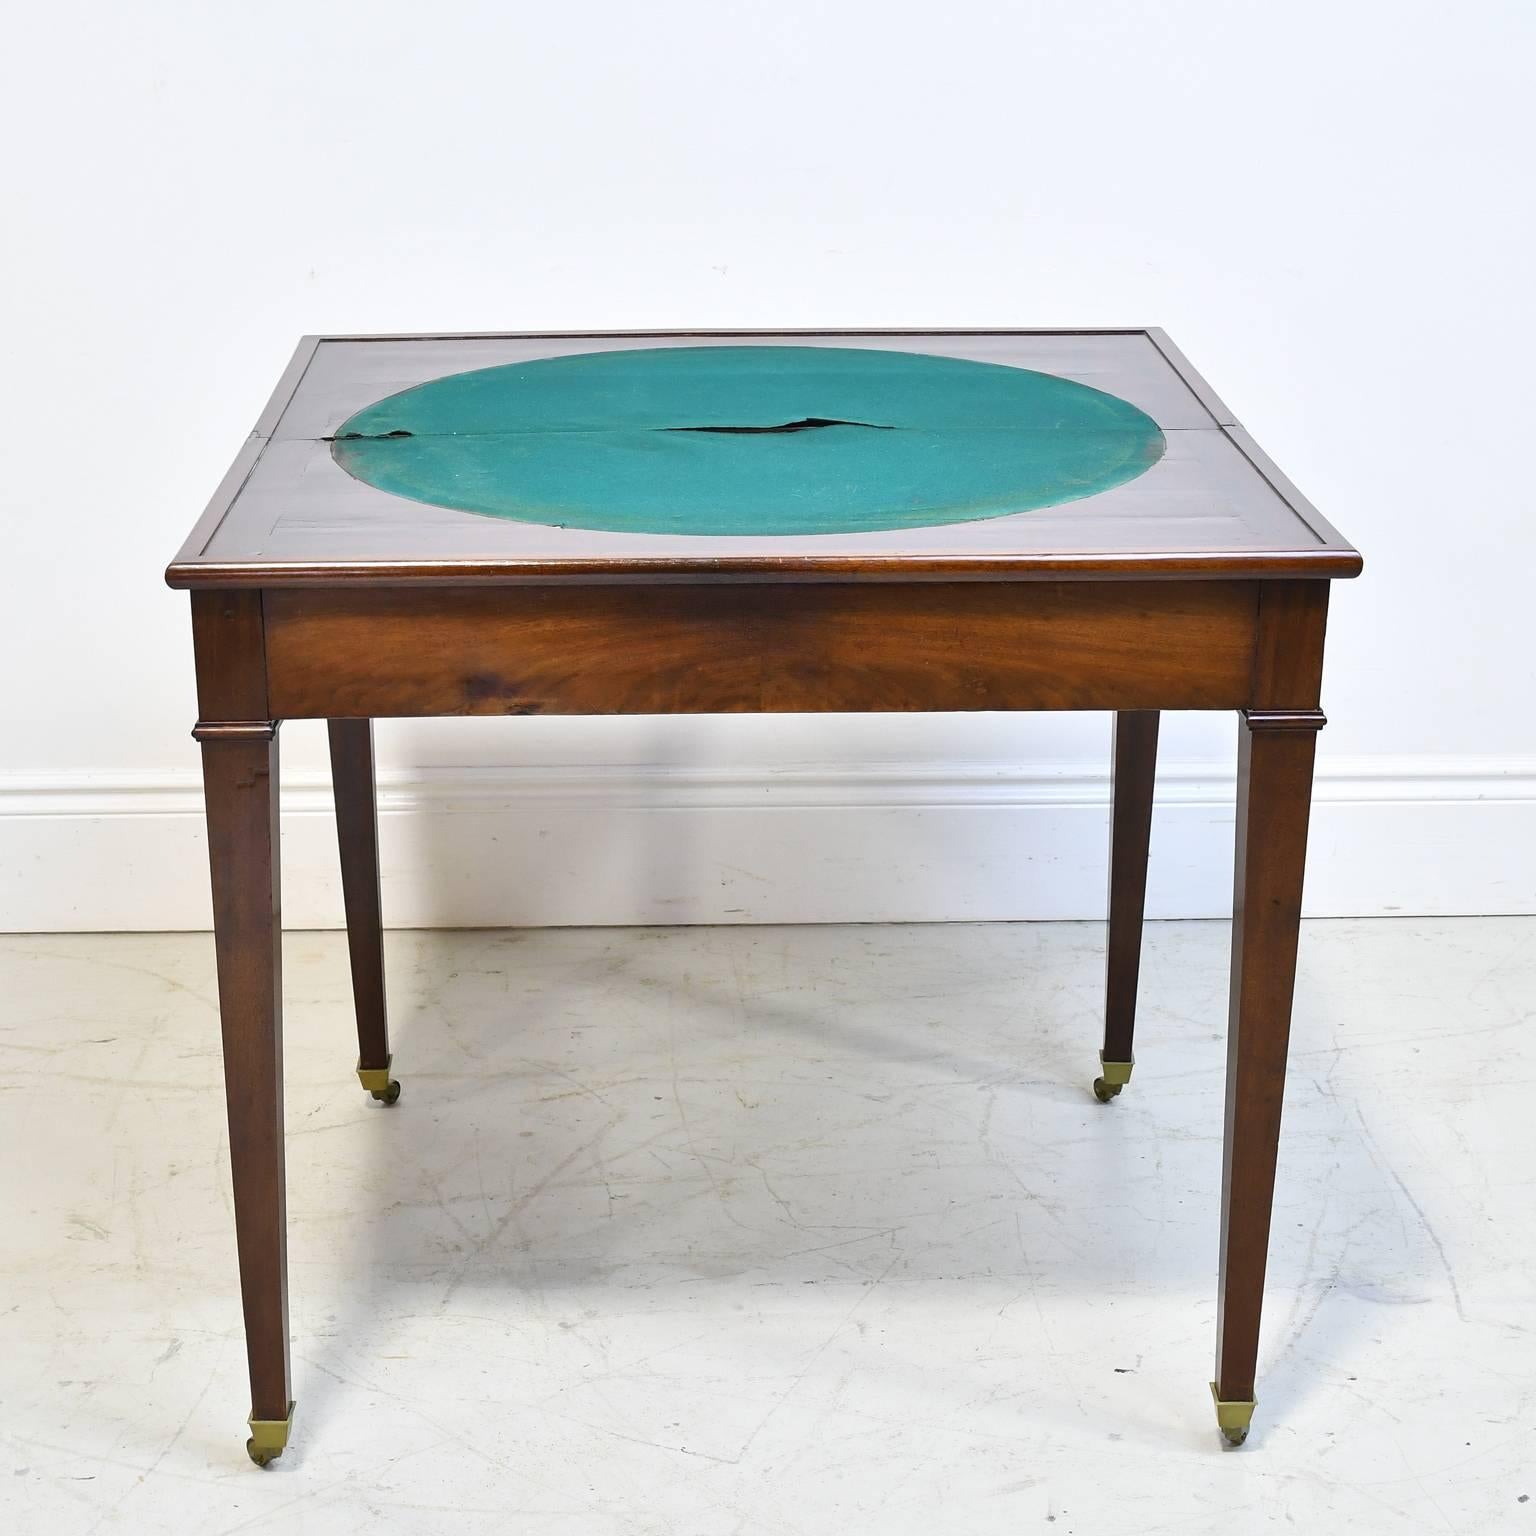 A very handsome games table in fine mahogany on tapered square legs with brass casters. Apron slides open to support hinged top with round inlaid baize, France, circa 1795.
Measures: 34